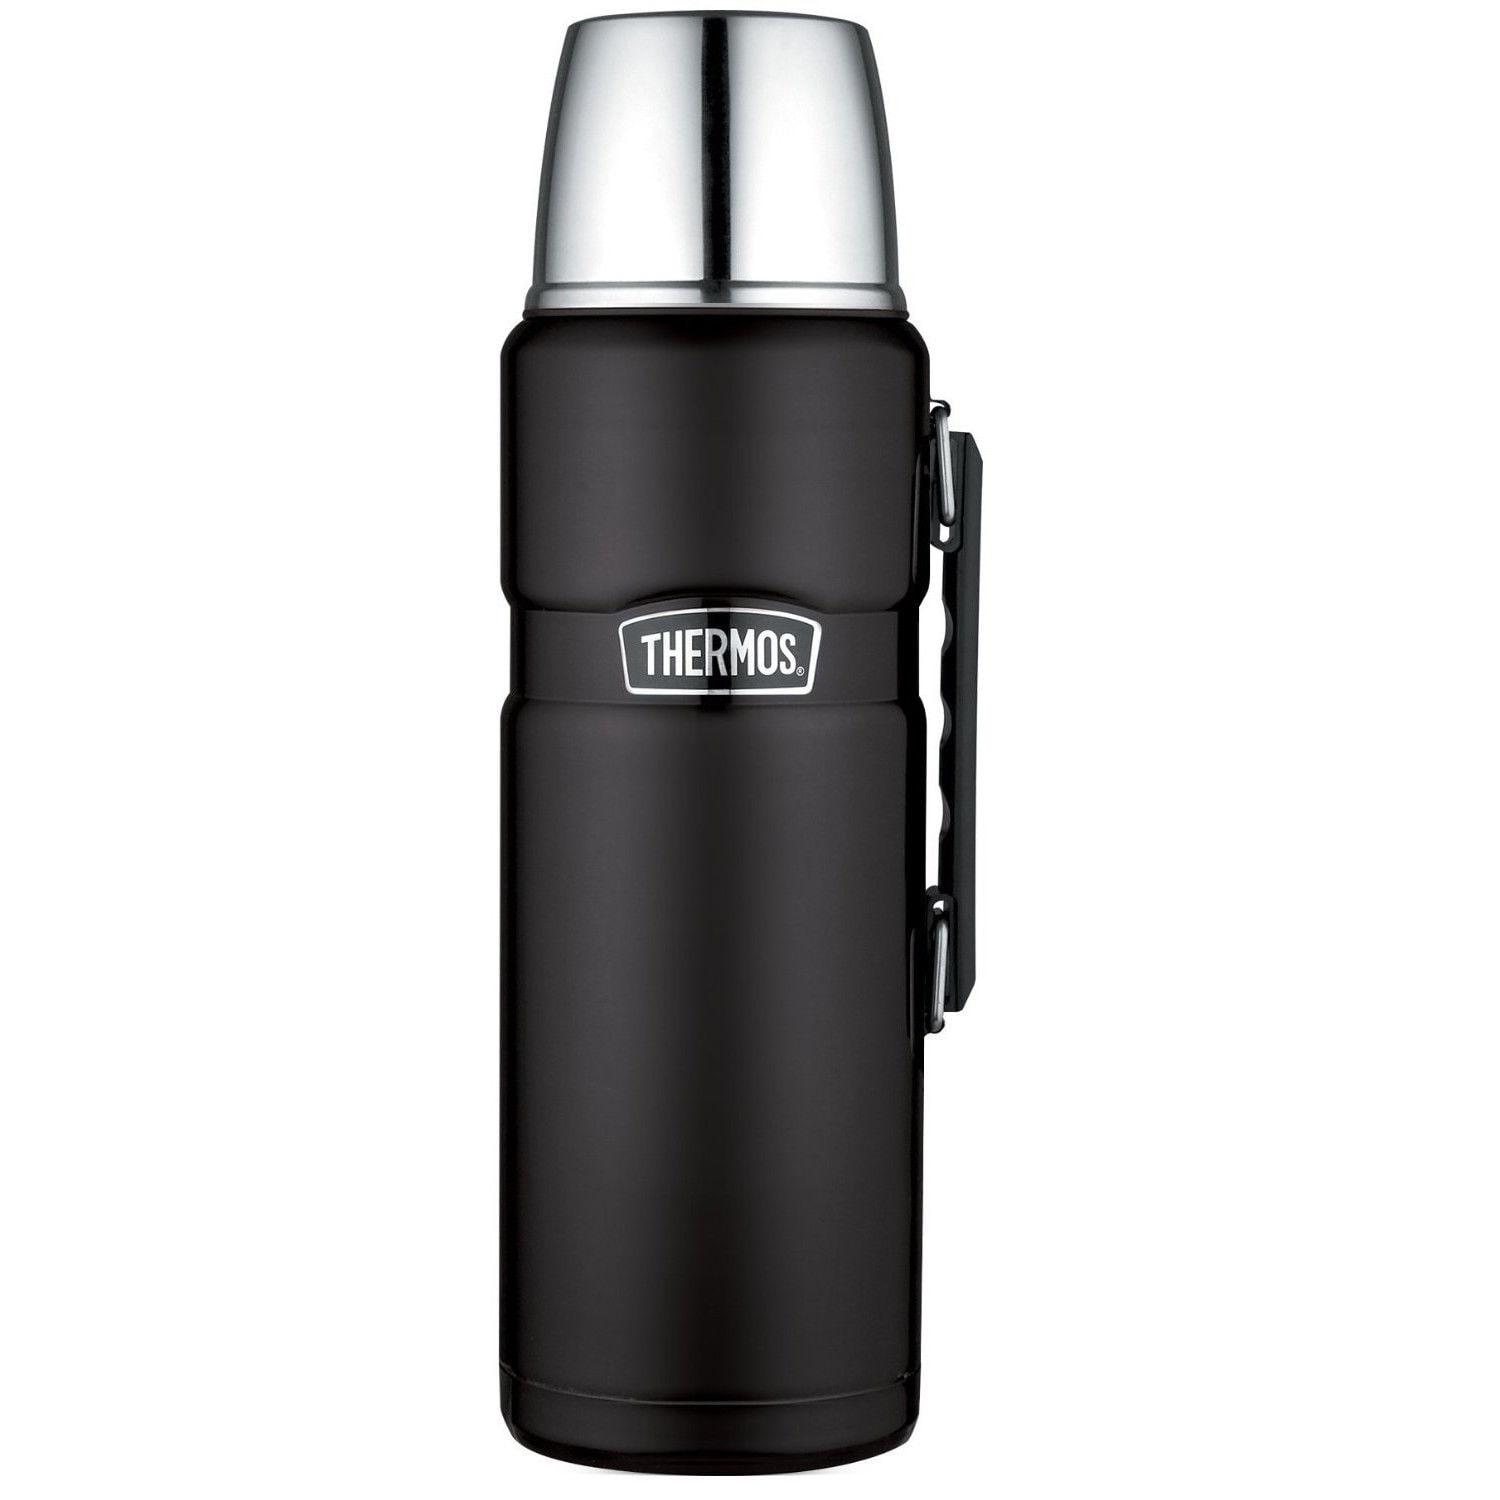 https://ak1.ostkcdn.com/images/products/is/images/direct/00150ac846ed81385015e8da4de92170a75bb8ca/Thermos-Stainless-King-Vacuum-Insulated-2-Liter-Beverage-Bottle-%28Matte-Black%29.jpg